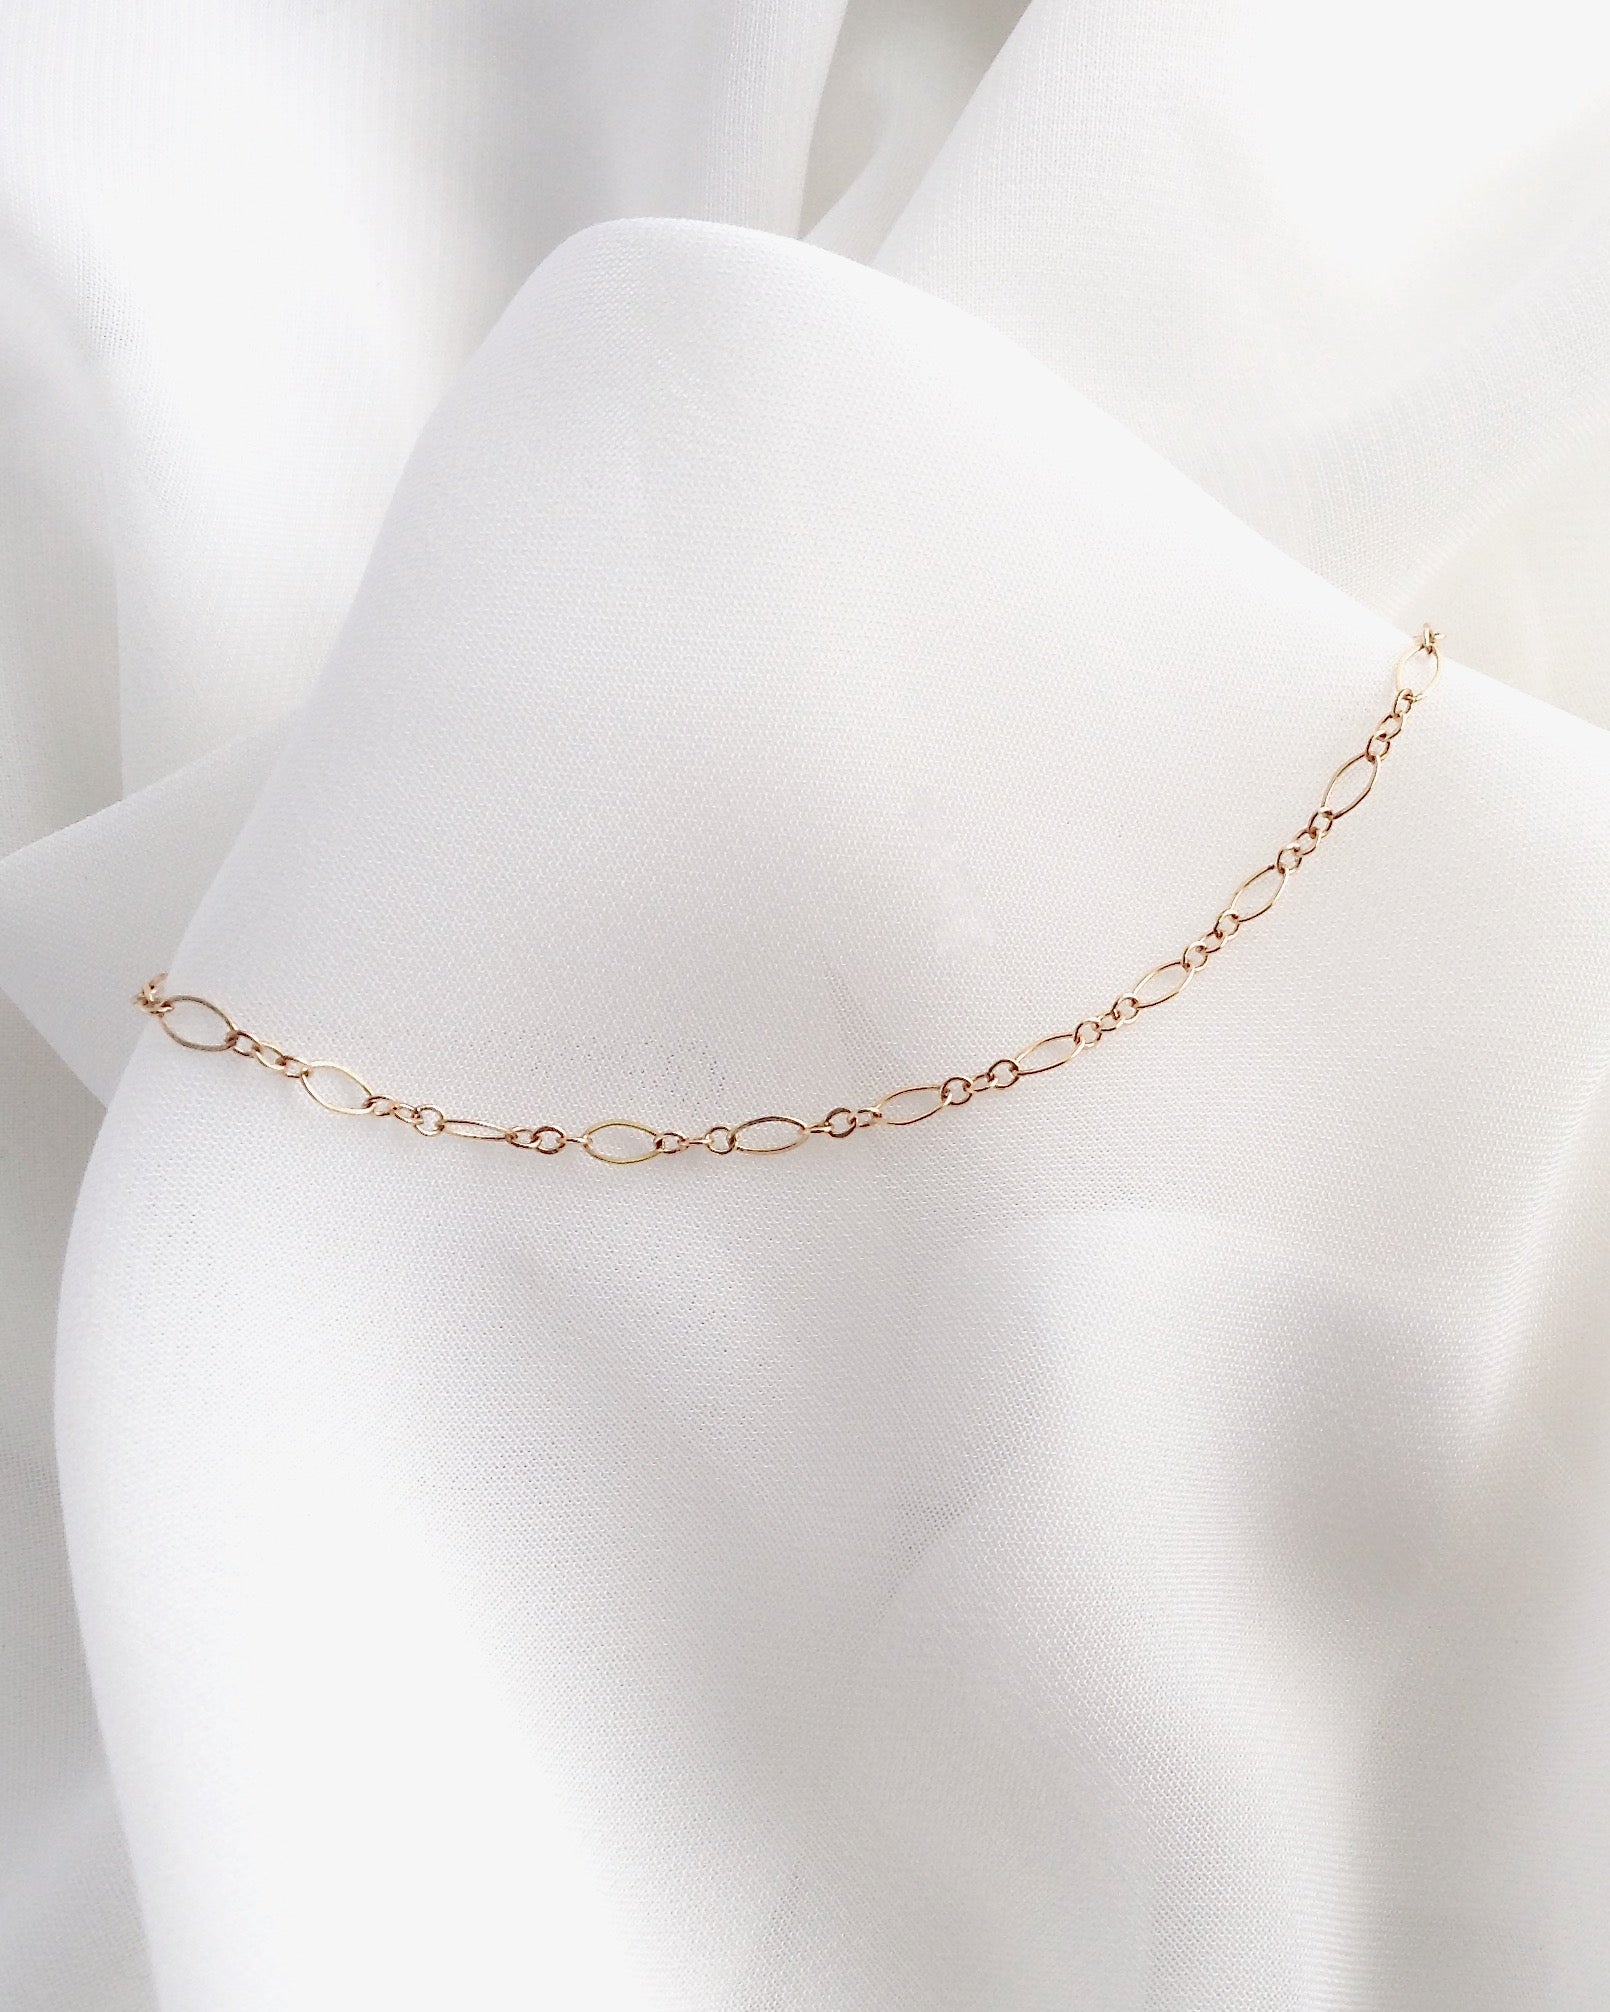 Oval Link Delicate Anklet | Minimal Dainty Anklet in Gold Filled or Sterling Silver | IB Jewelry